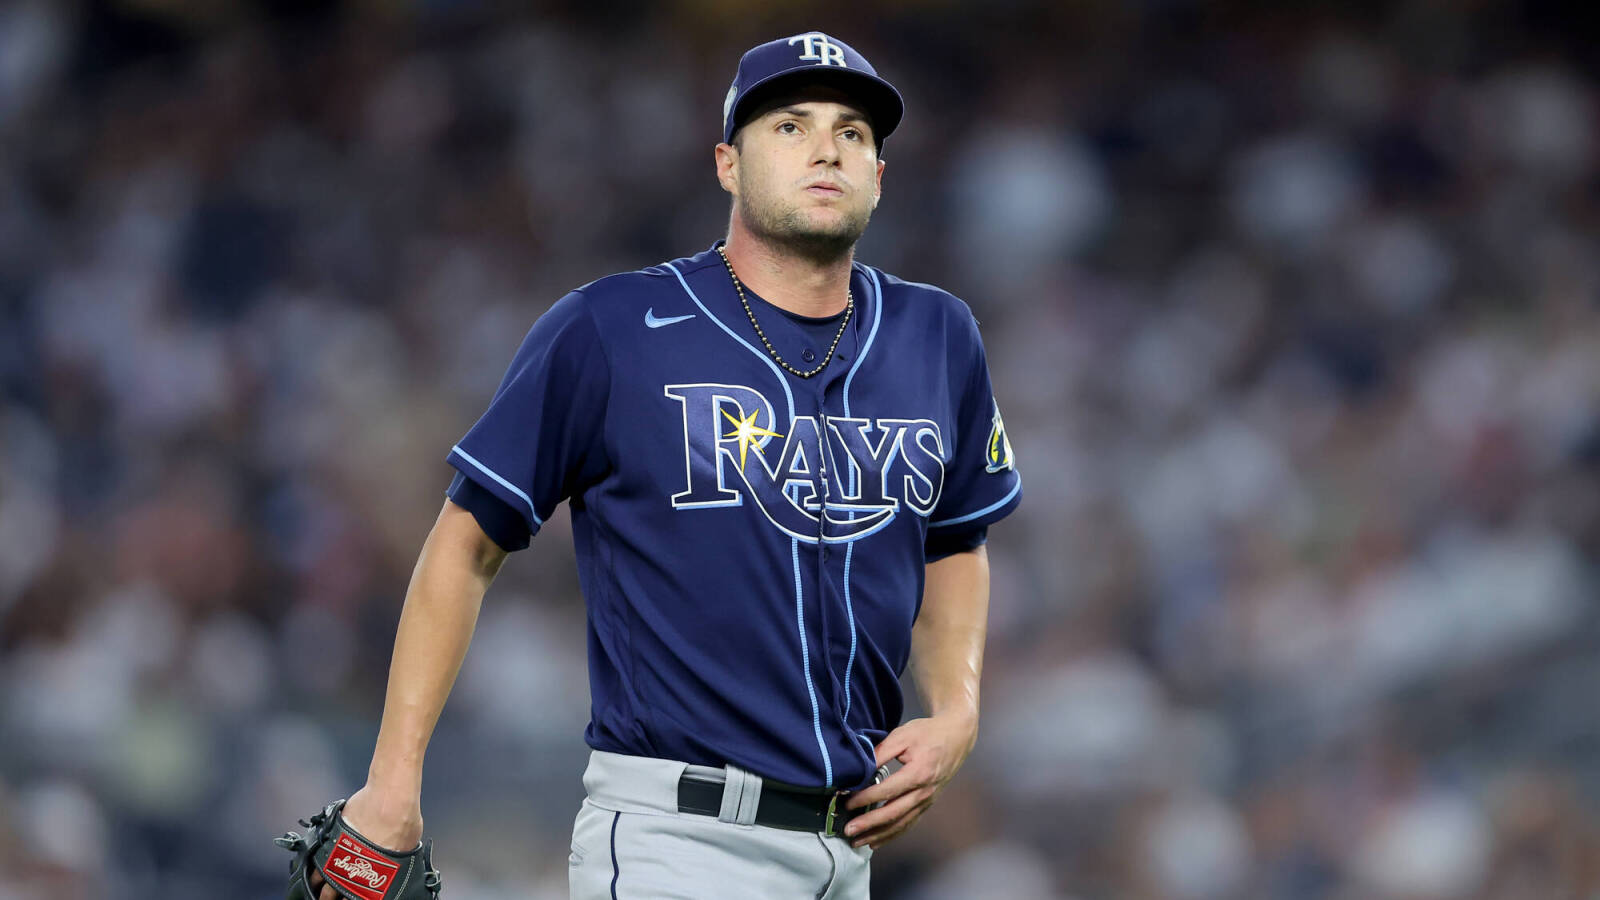 Rays agree to two-year contract with ace pitcher | Yardbarker